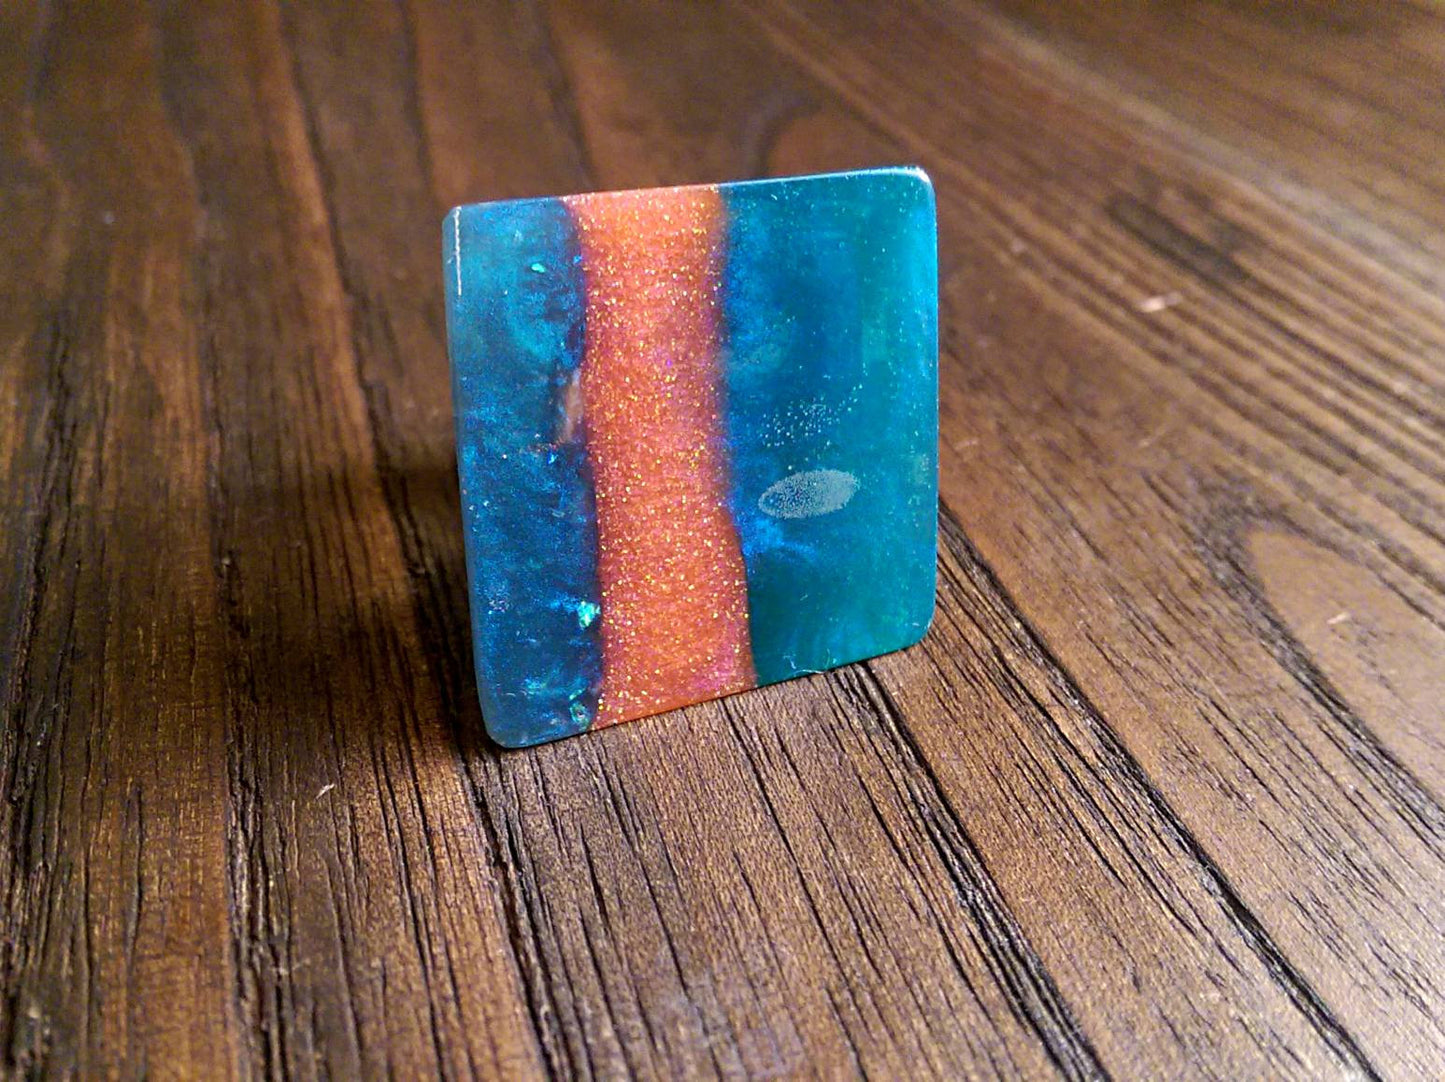 Statement Square Resin Ring, Handmade Size 7 US N AU. Blue Glitter Mix Ring